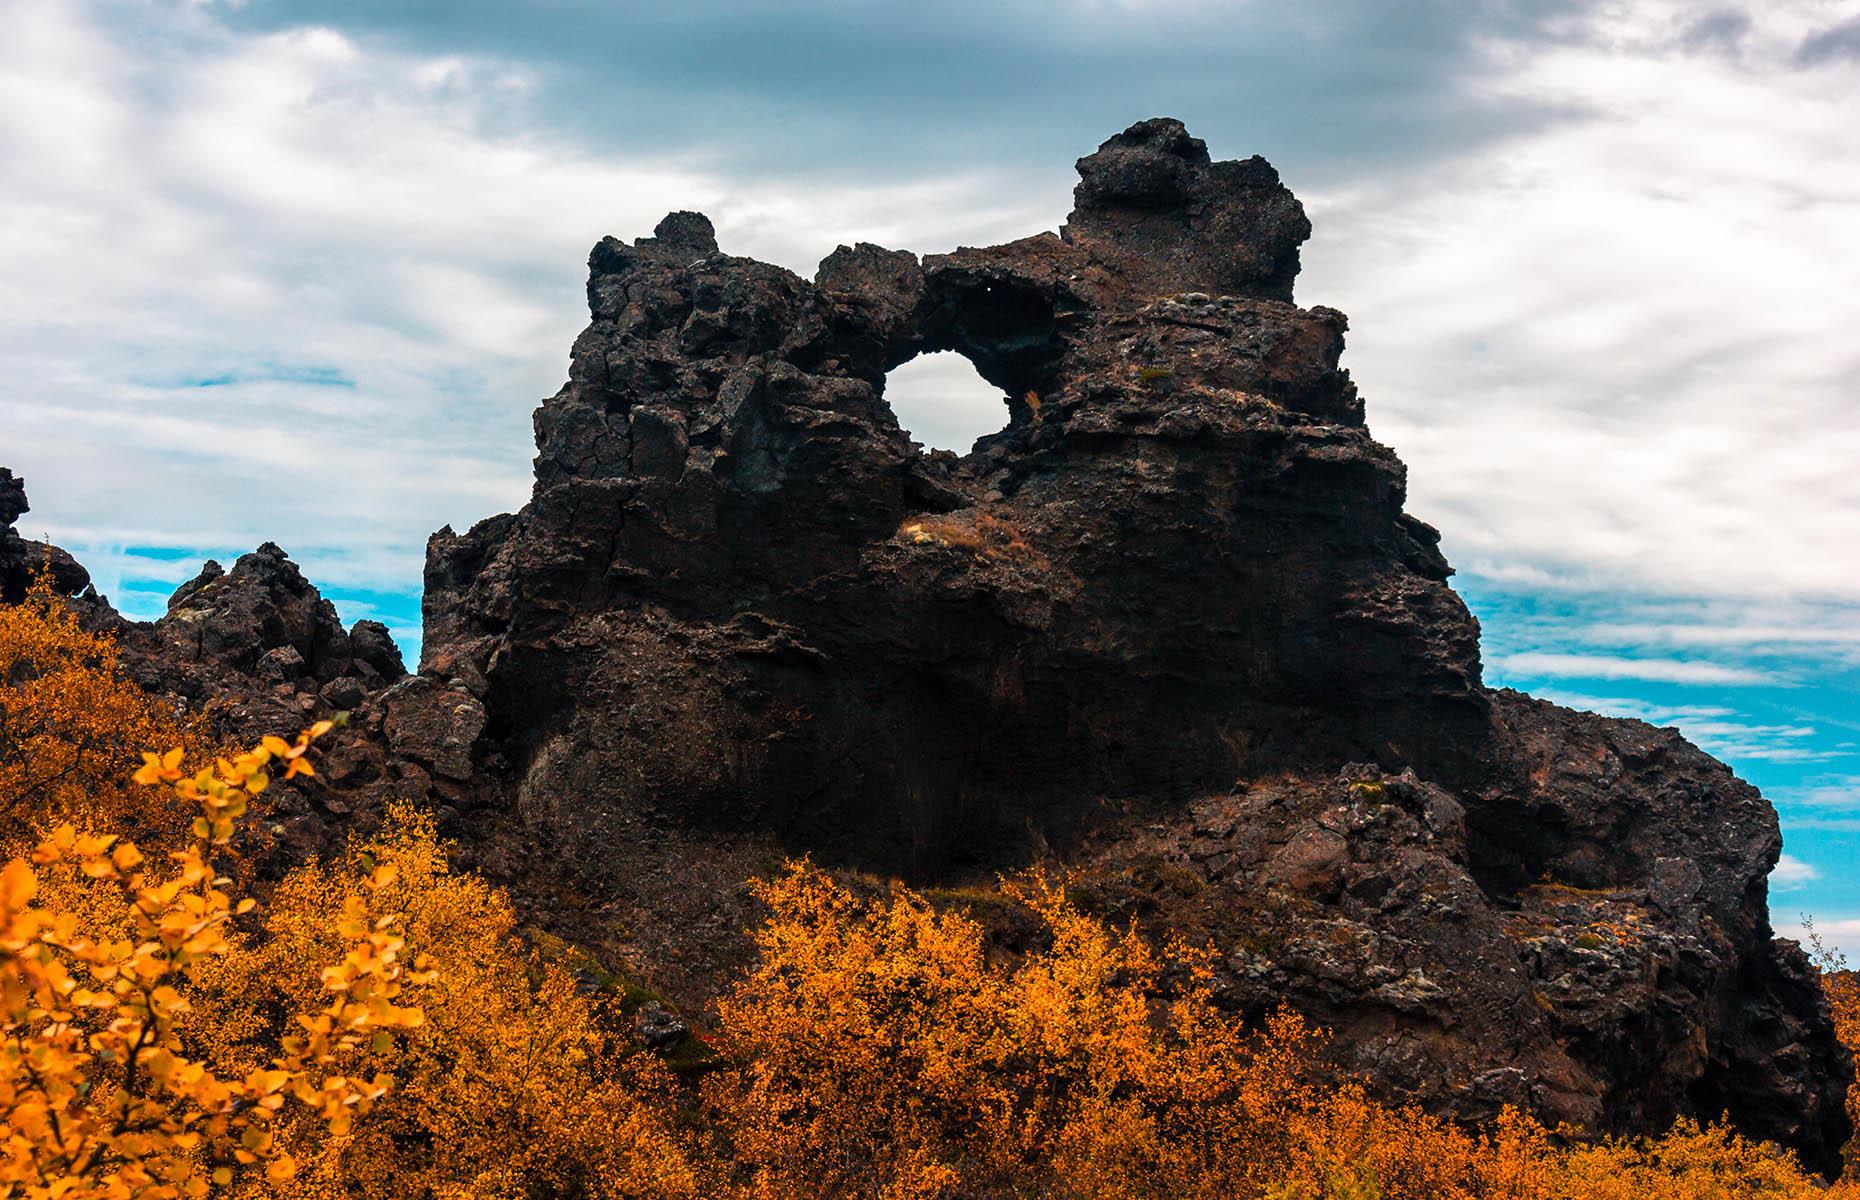 <p>A jewel of northern Iceland, Dimmuborgir, meaning dark fortress, is a stark area of lava fields close to Lake Mývatn. Formed by an eruption several millennia ago, and also serving as a location for HBO's <em>Game of Thrones</em>, the area has legends aplenty. It's believed that the rock formations are a portal to the underworld and also as the home of the Yule Lads – the 13 tricksy sons of troll Grýla, who come out at Christmastime. Chase the legends on one of several hiking routes that criss-cross the area.</p>